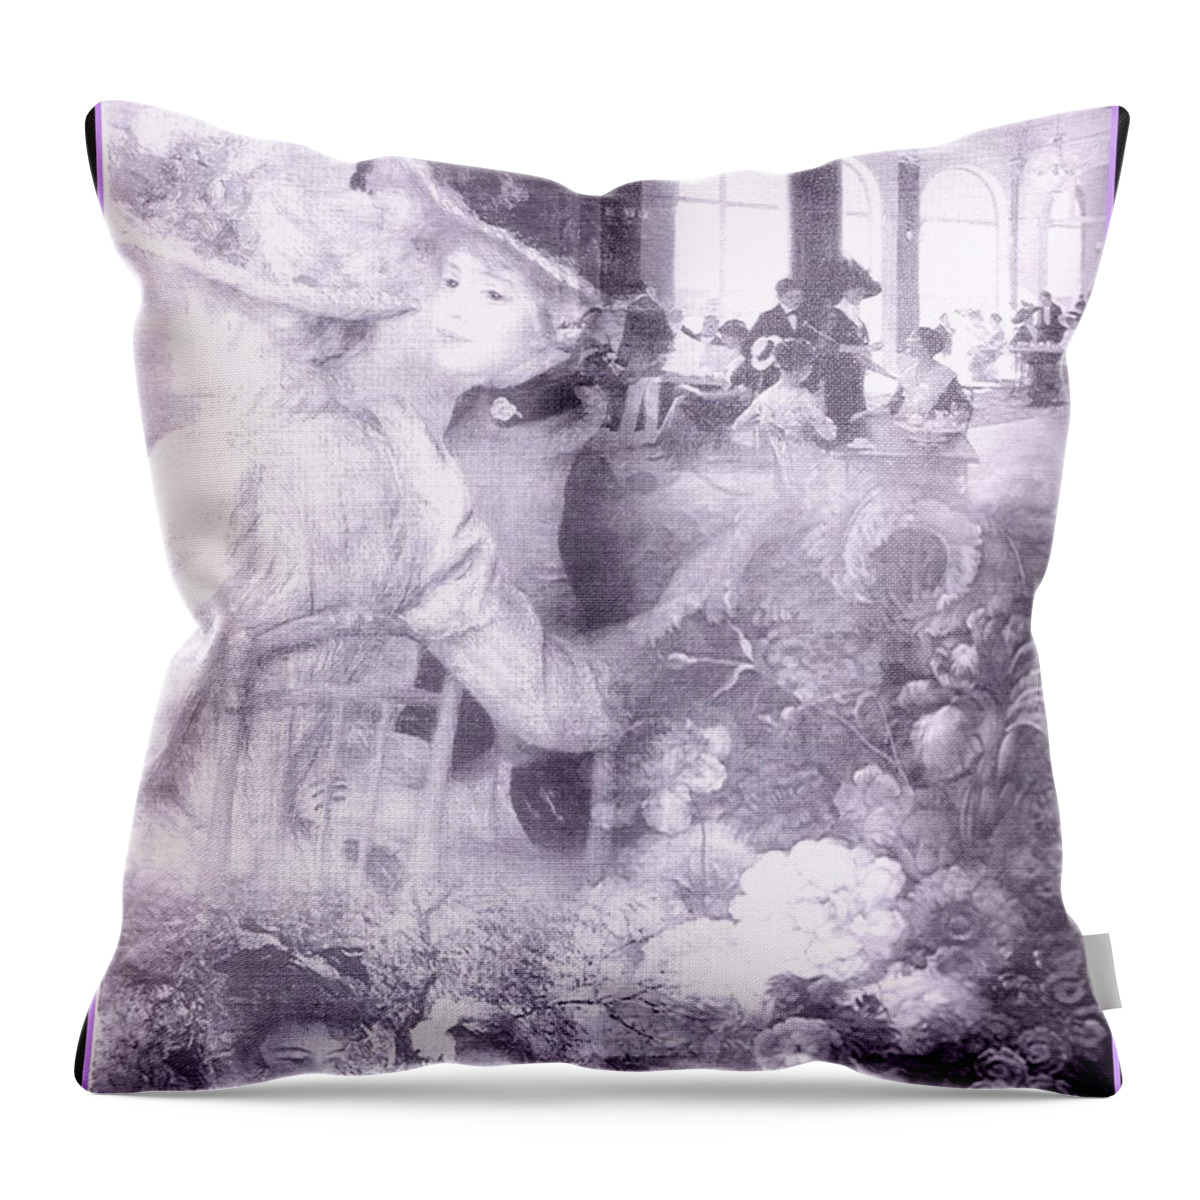 Victorian Ladies Throw Pillow featuring the photograph Lavender Ladies by Jacqueline Manos